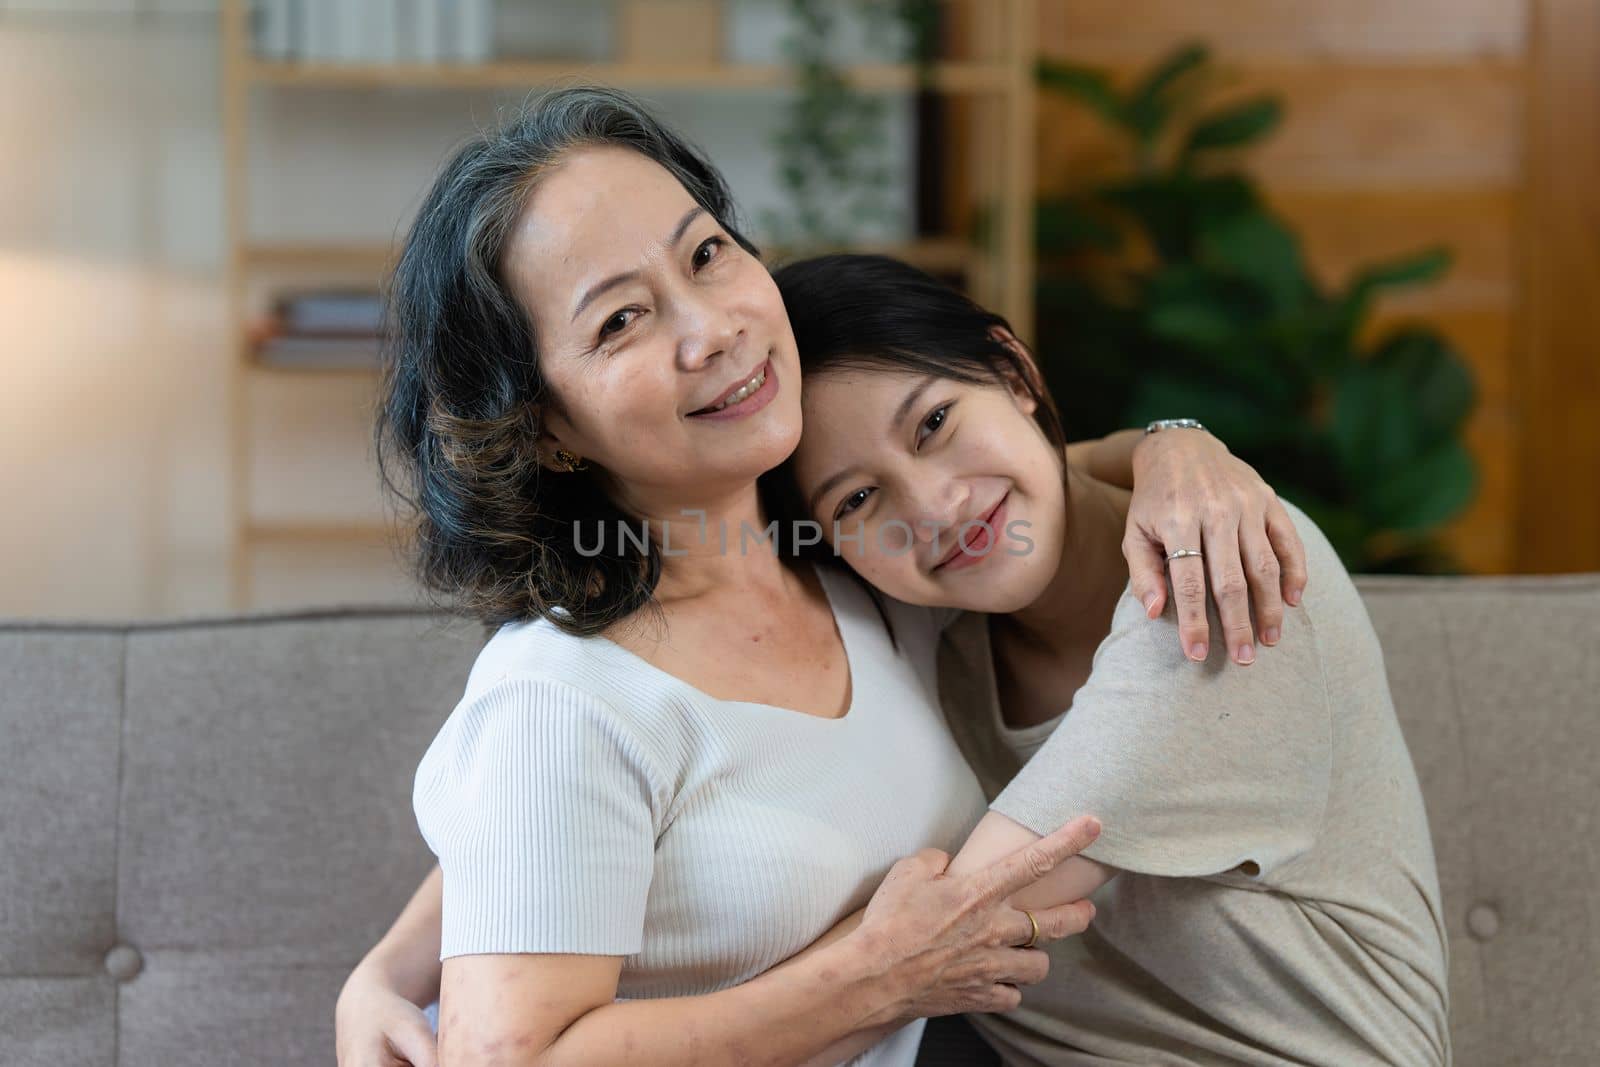 Happy senior Asian woman and her adult daughter are cuddling on the couch.